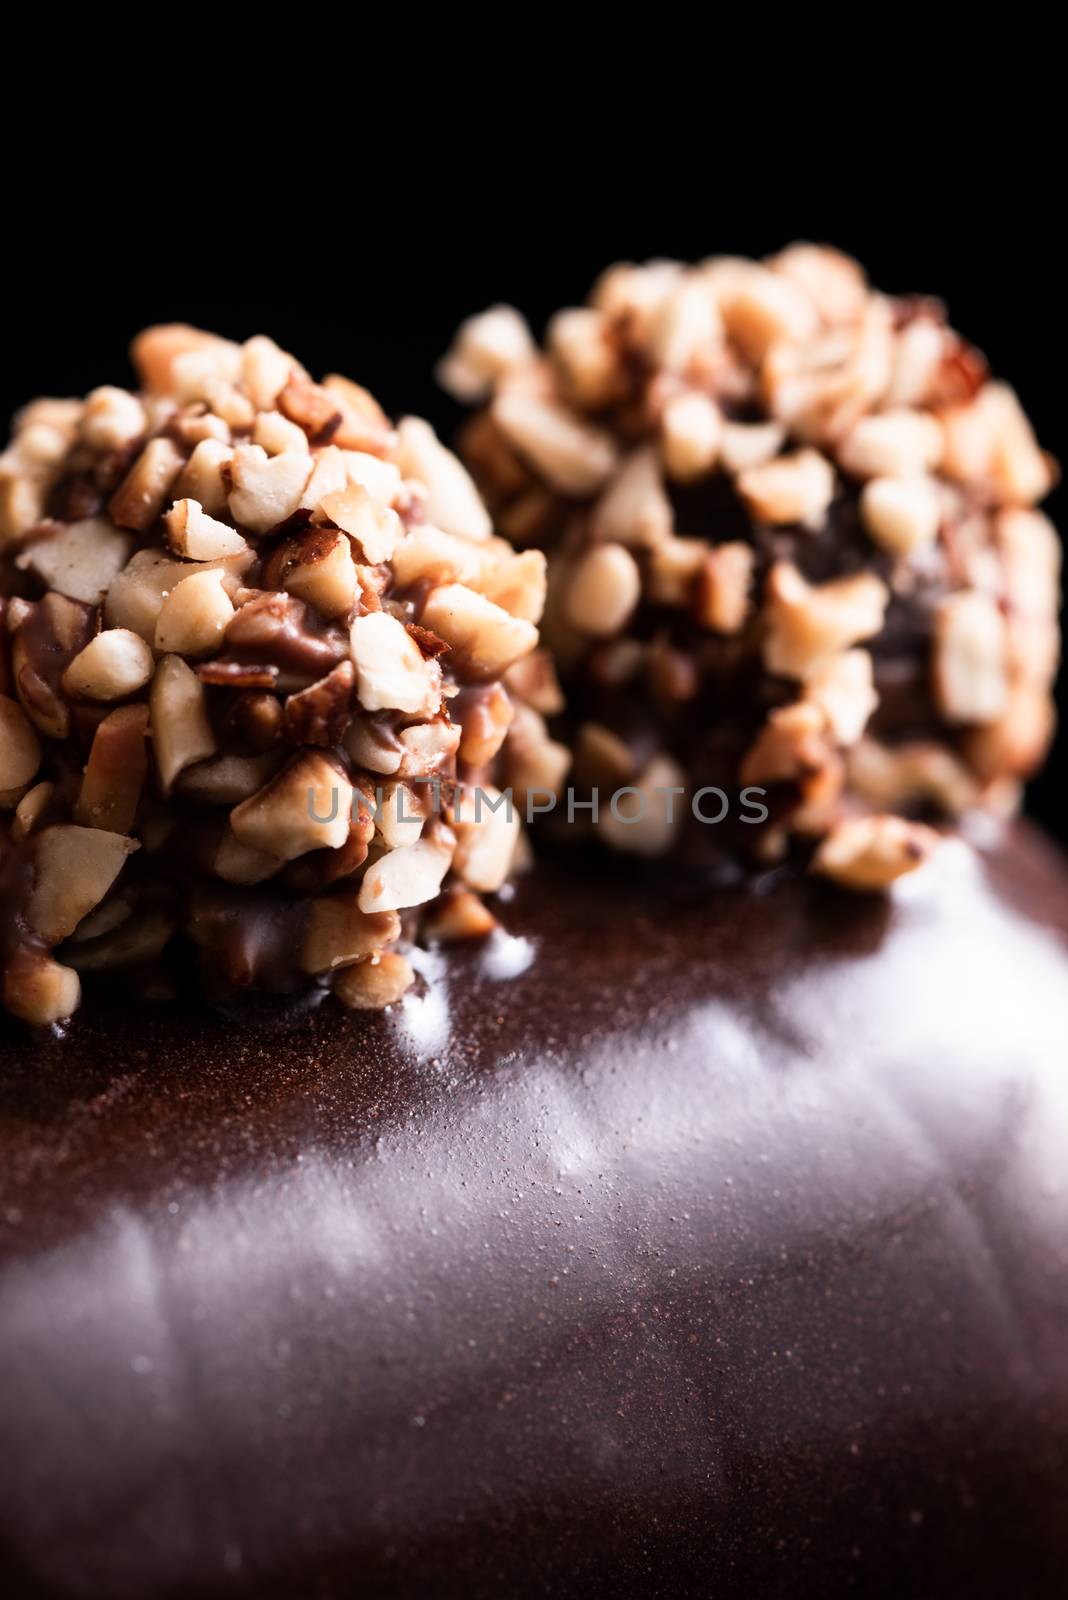 Handmade Patisserie Confection. Creative Art of Confectionery. Close Up Detail View.